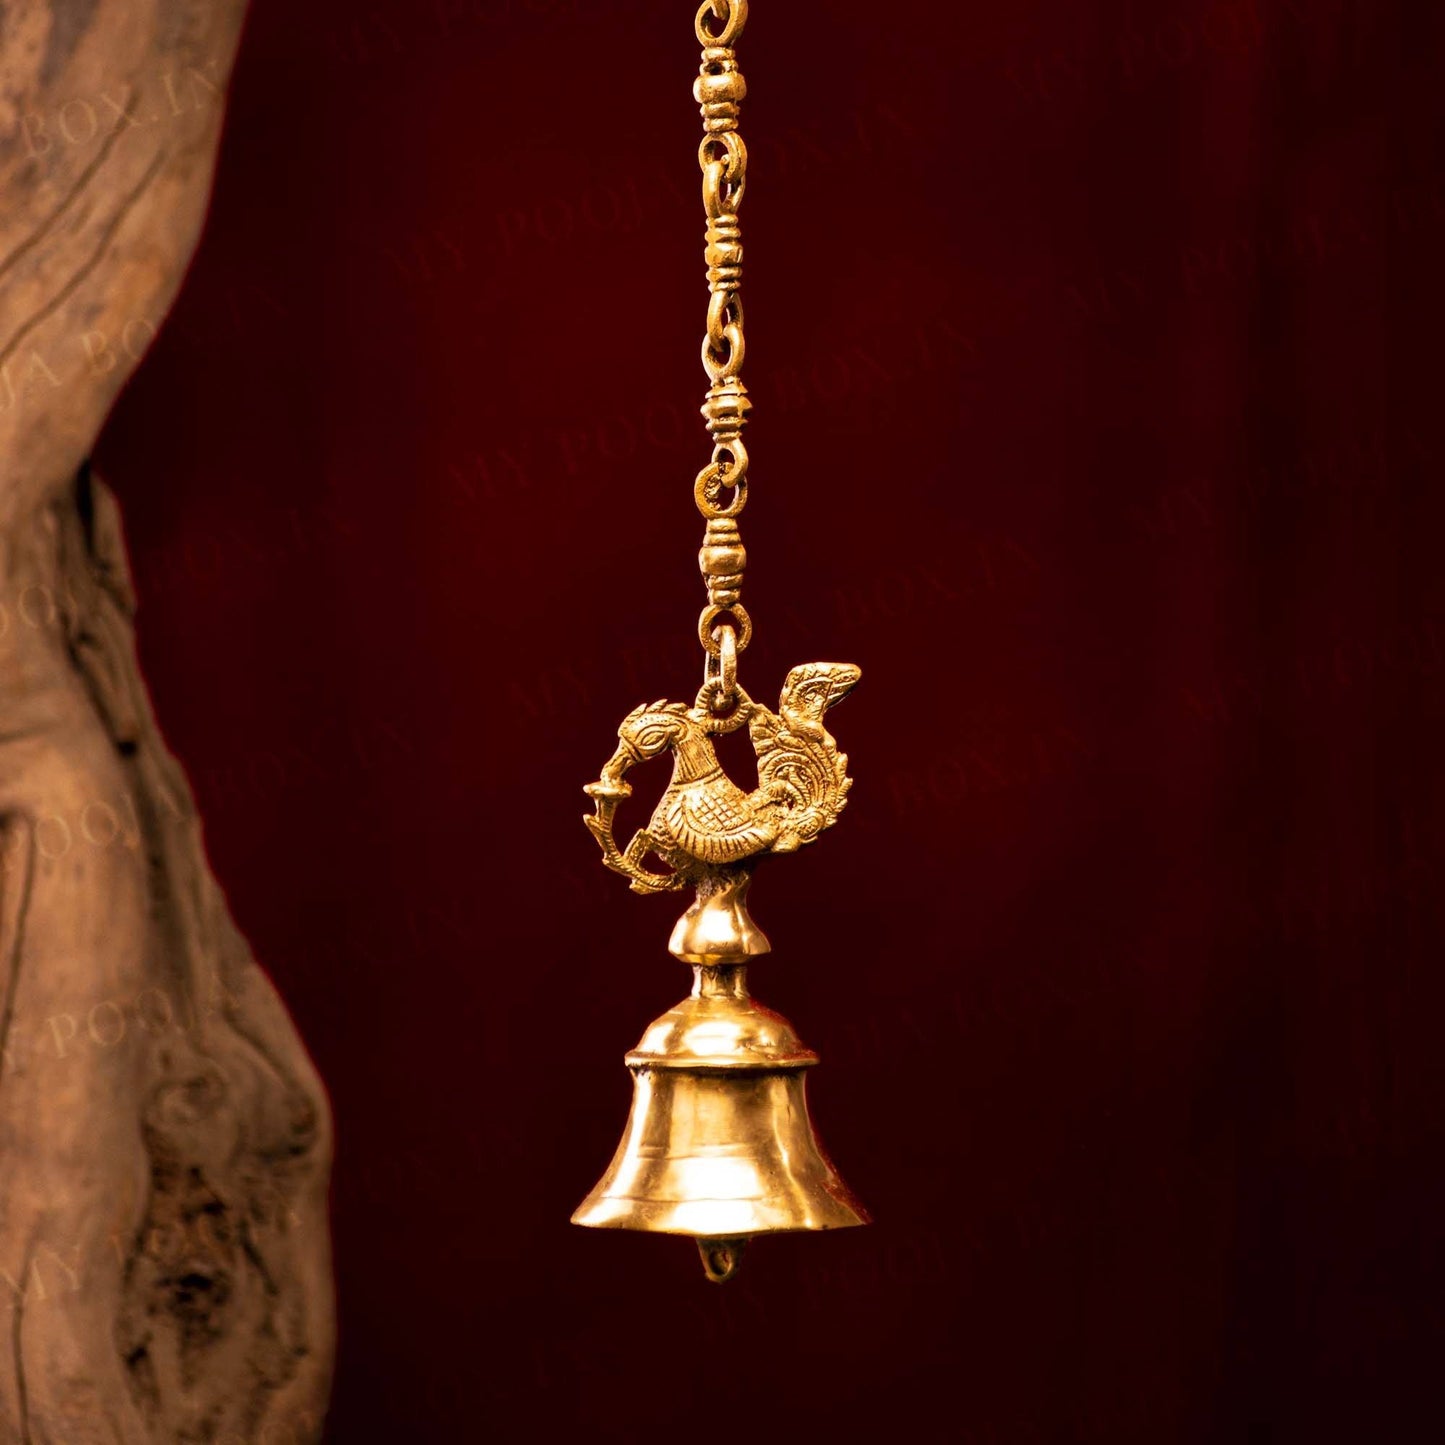 Antique Brass Hanging Peacock Bell